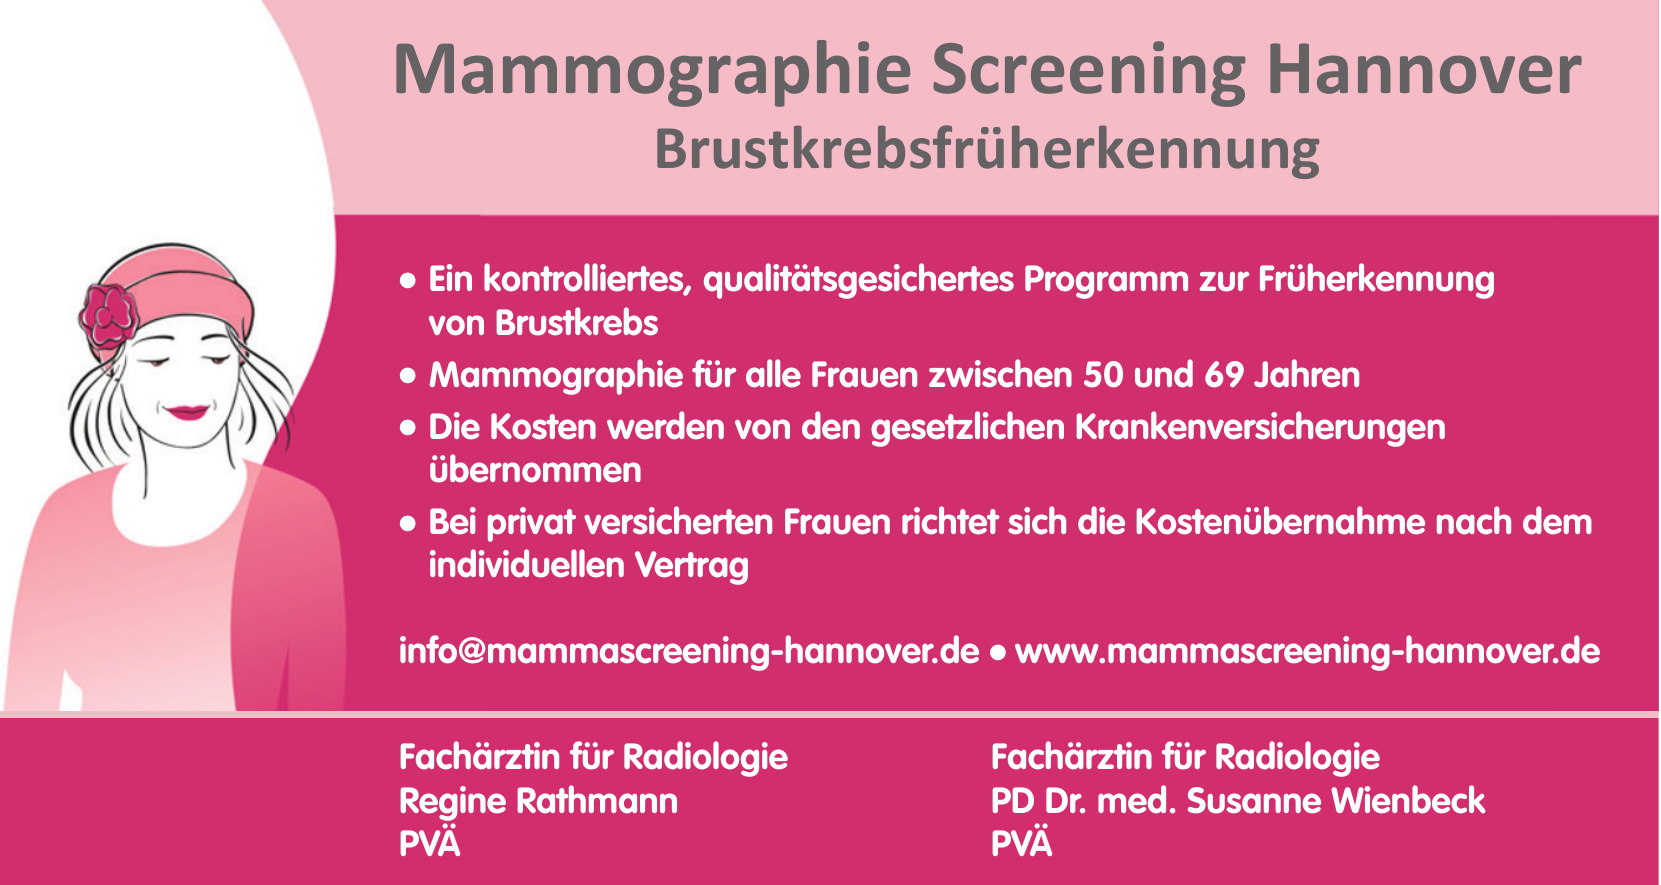 Mammographie Screening Hannover